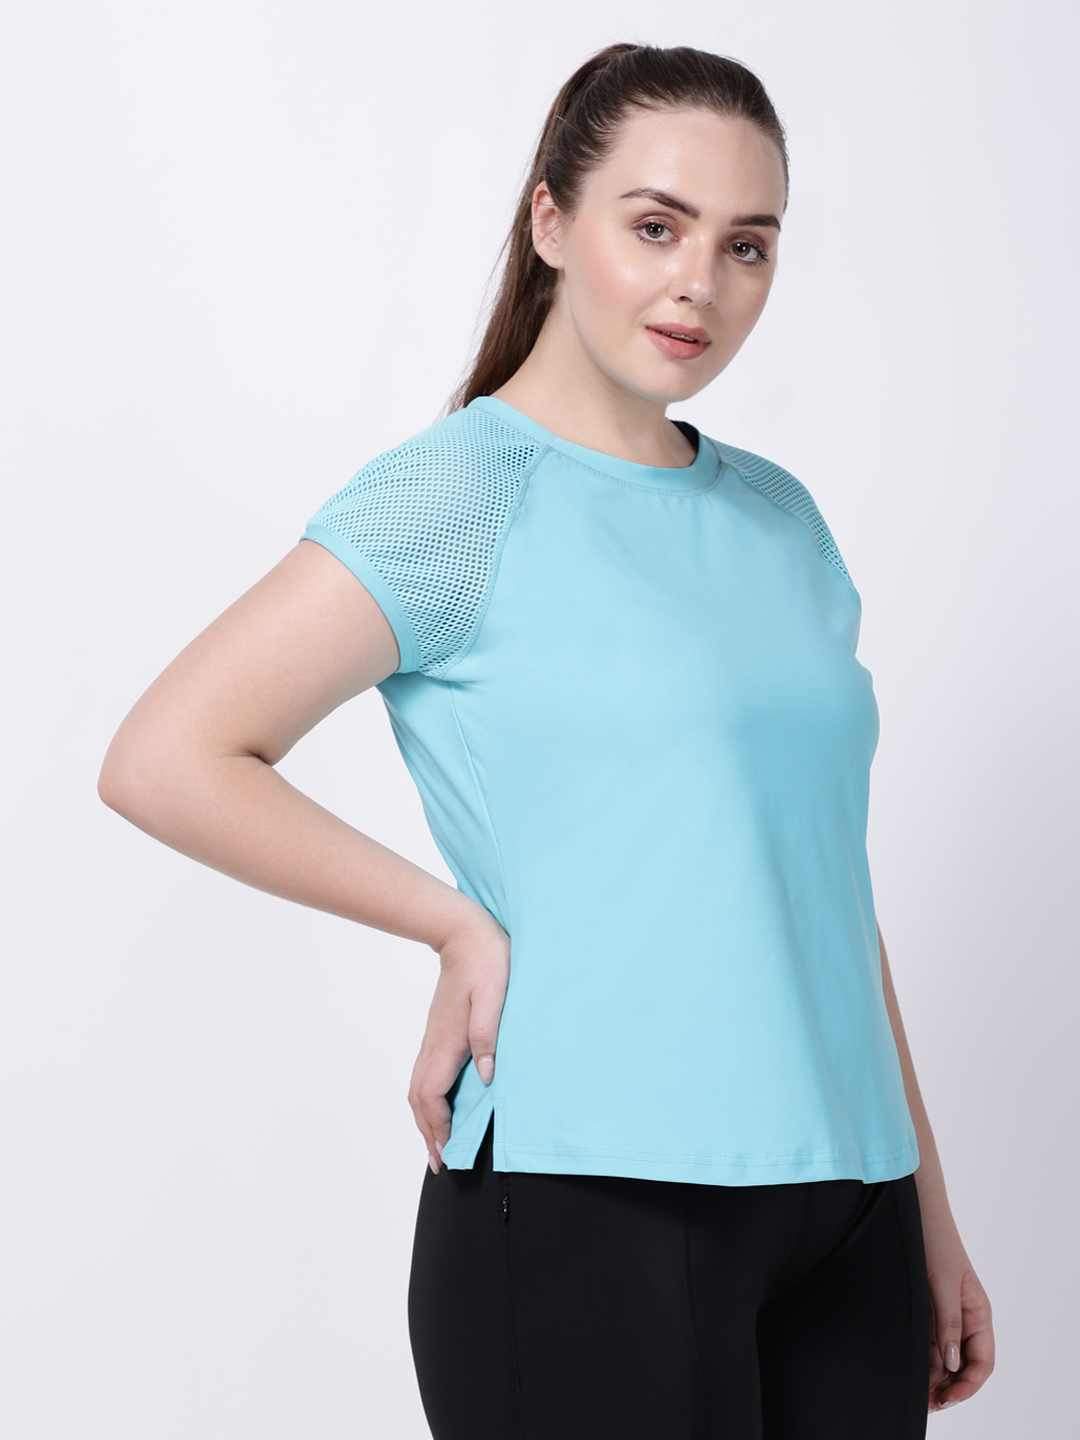 Turquoise Classy Lady Tee